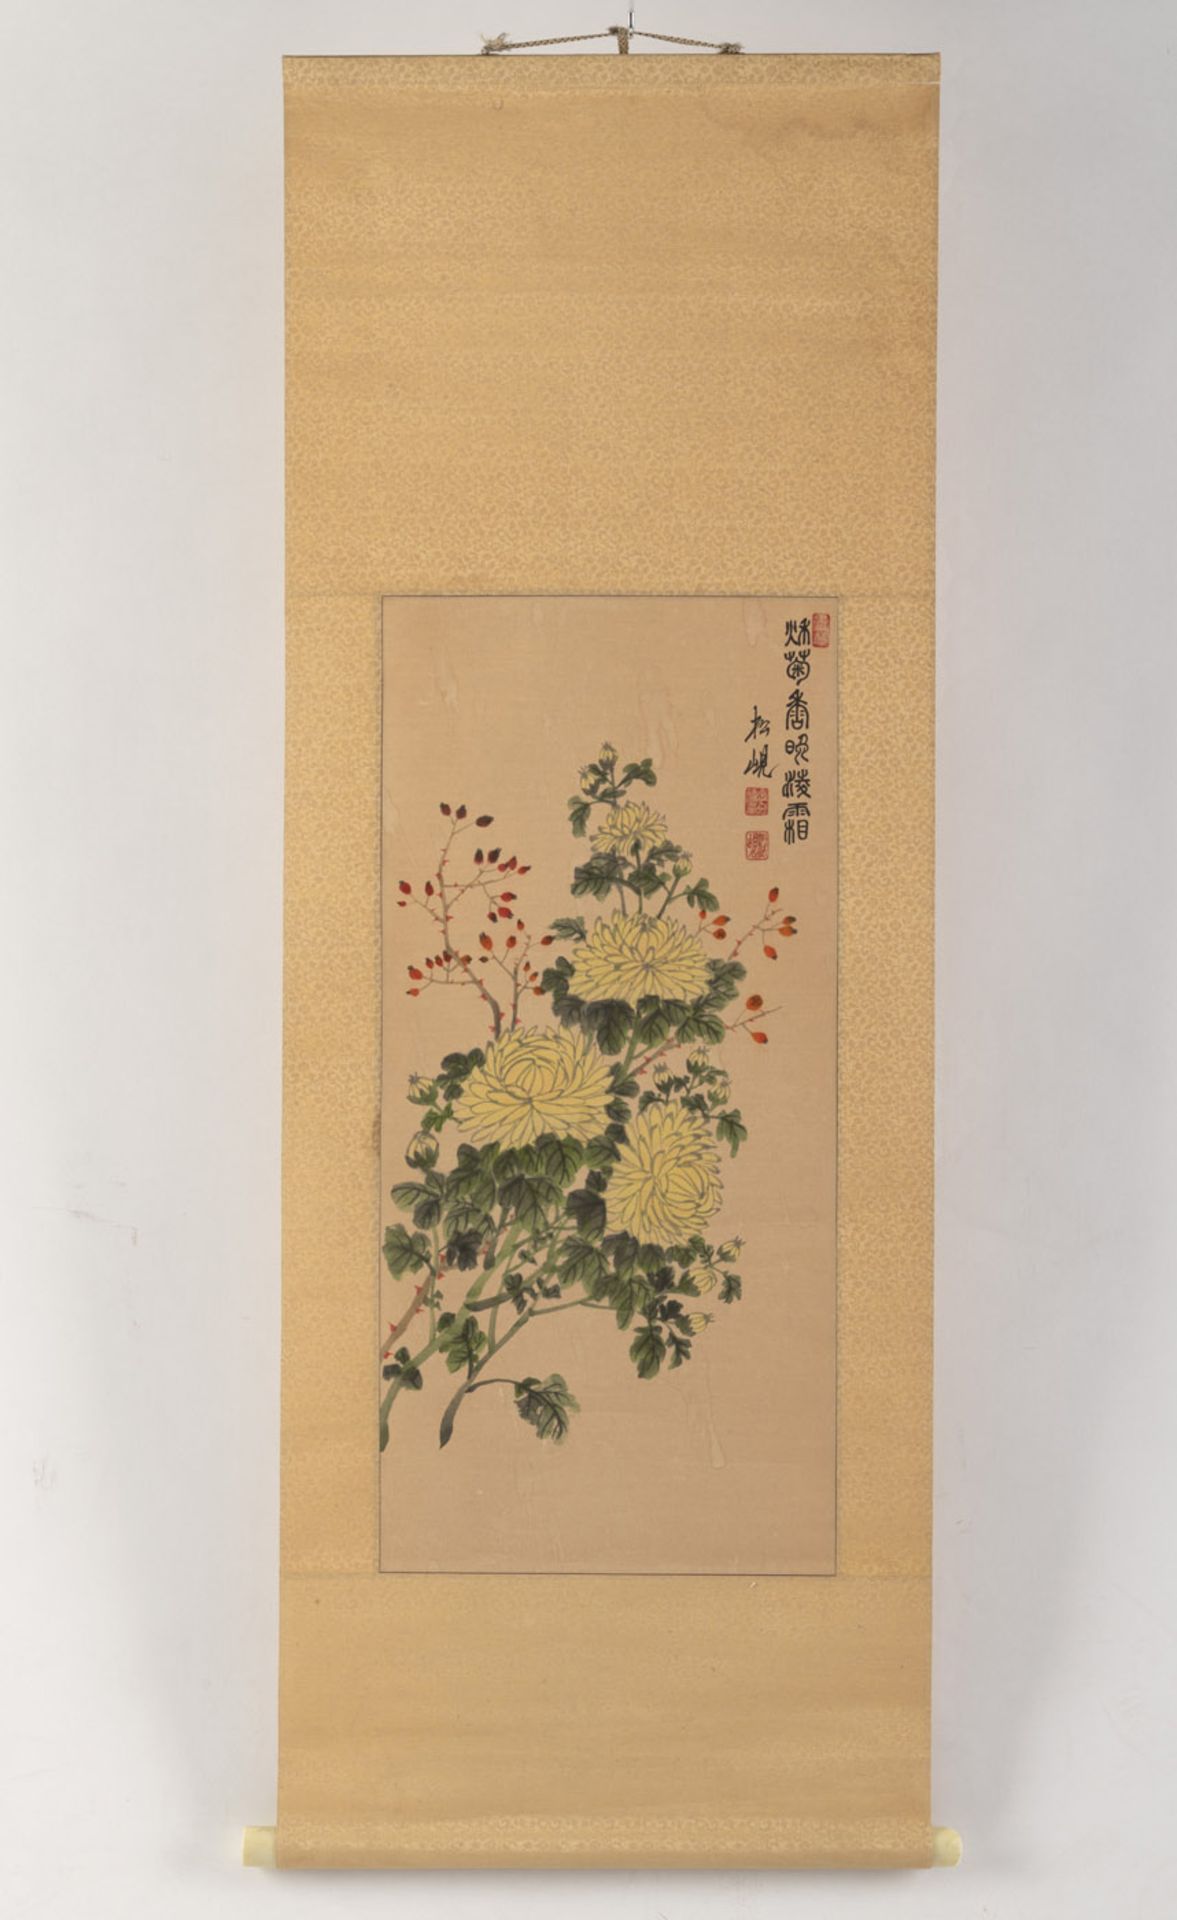 FOUR PAINTINGS DEPICTING THE "FOUR NOBLES": PLUM, ORCHID, BAMBOO AND CHRYSANTHEMUM - Image 13 of 16